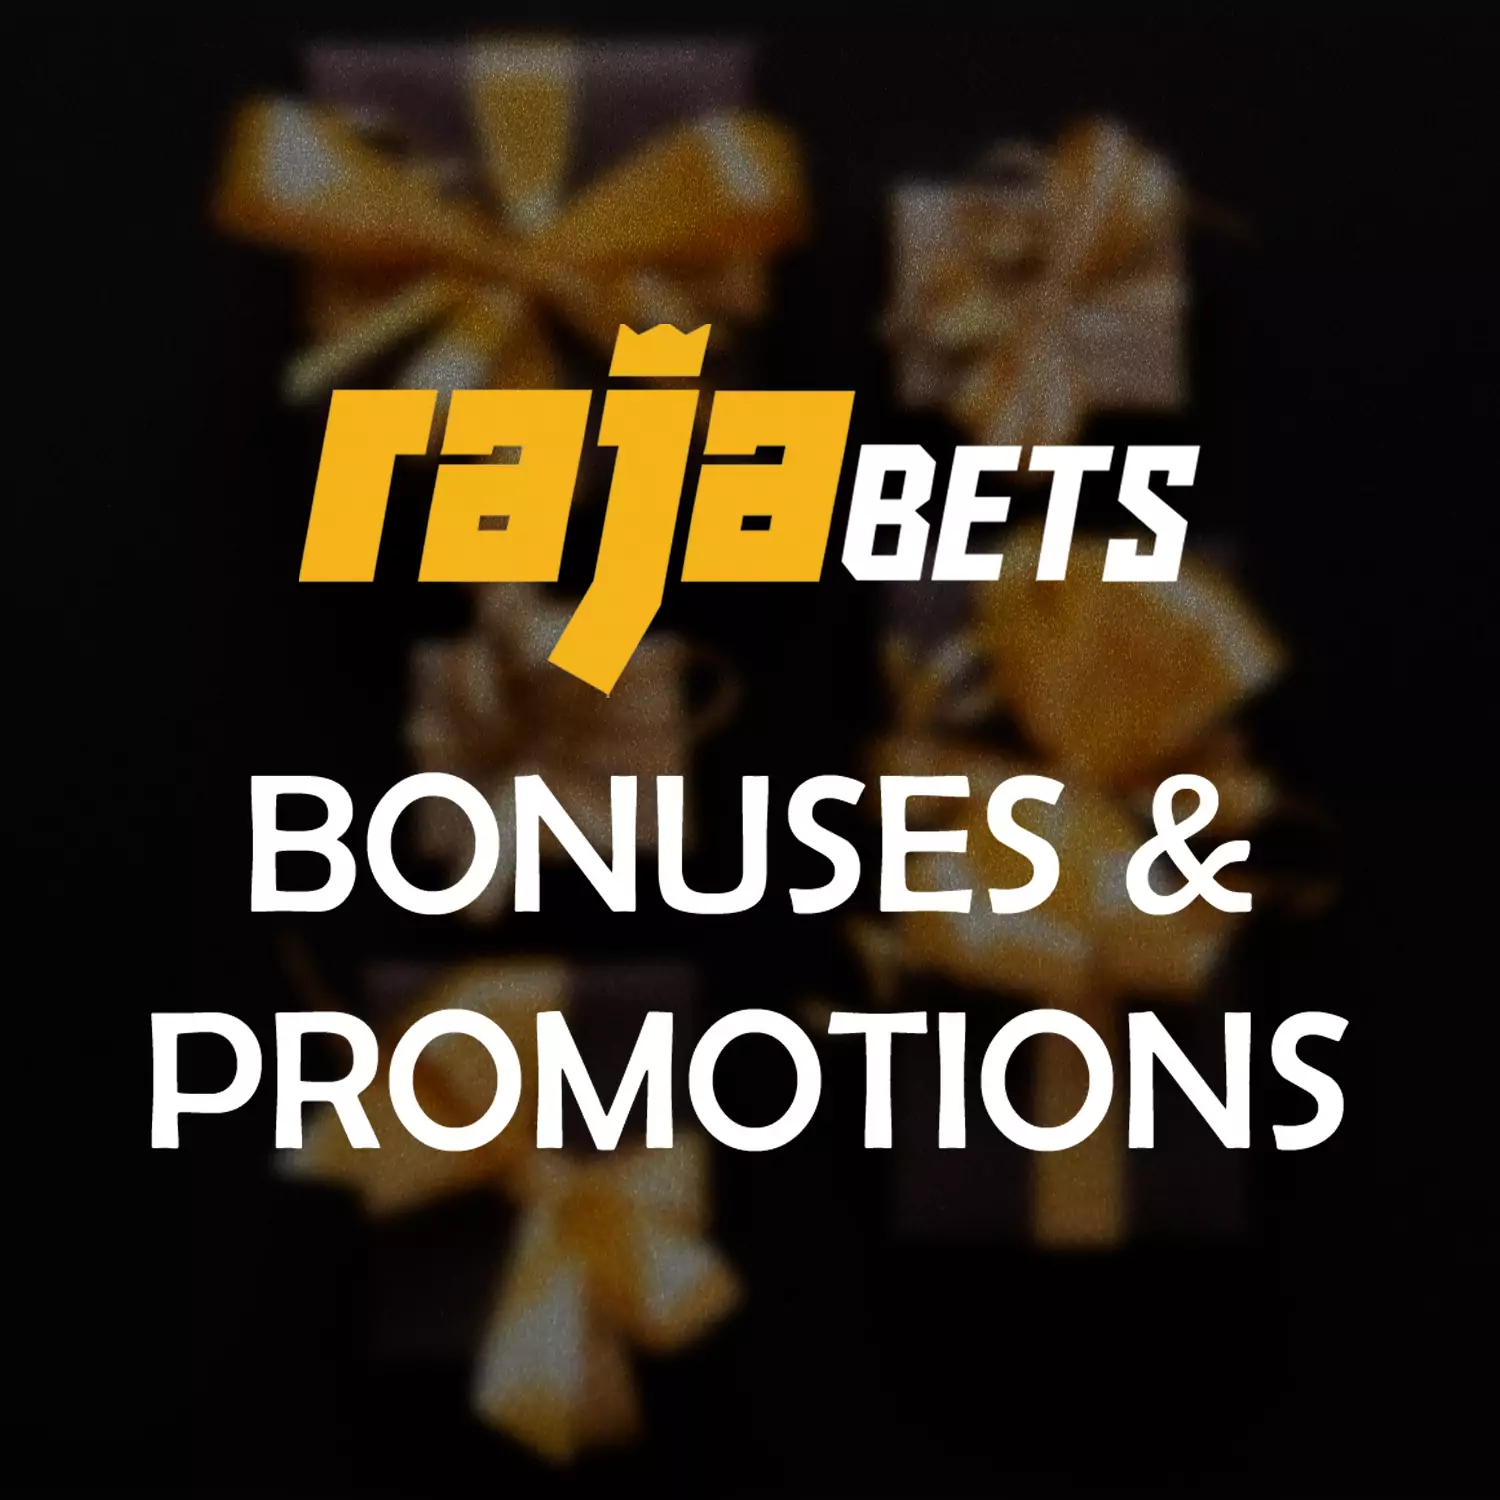 In addition to bonuses on the first deposit, there are some other promotions on the site.